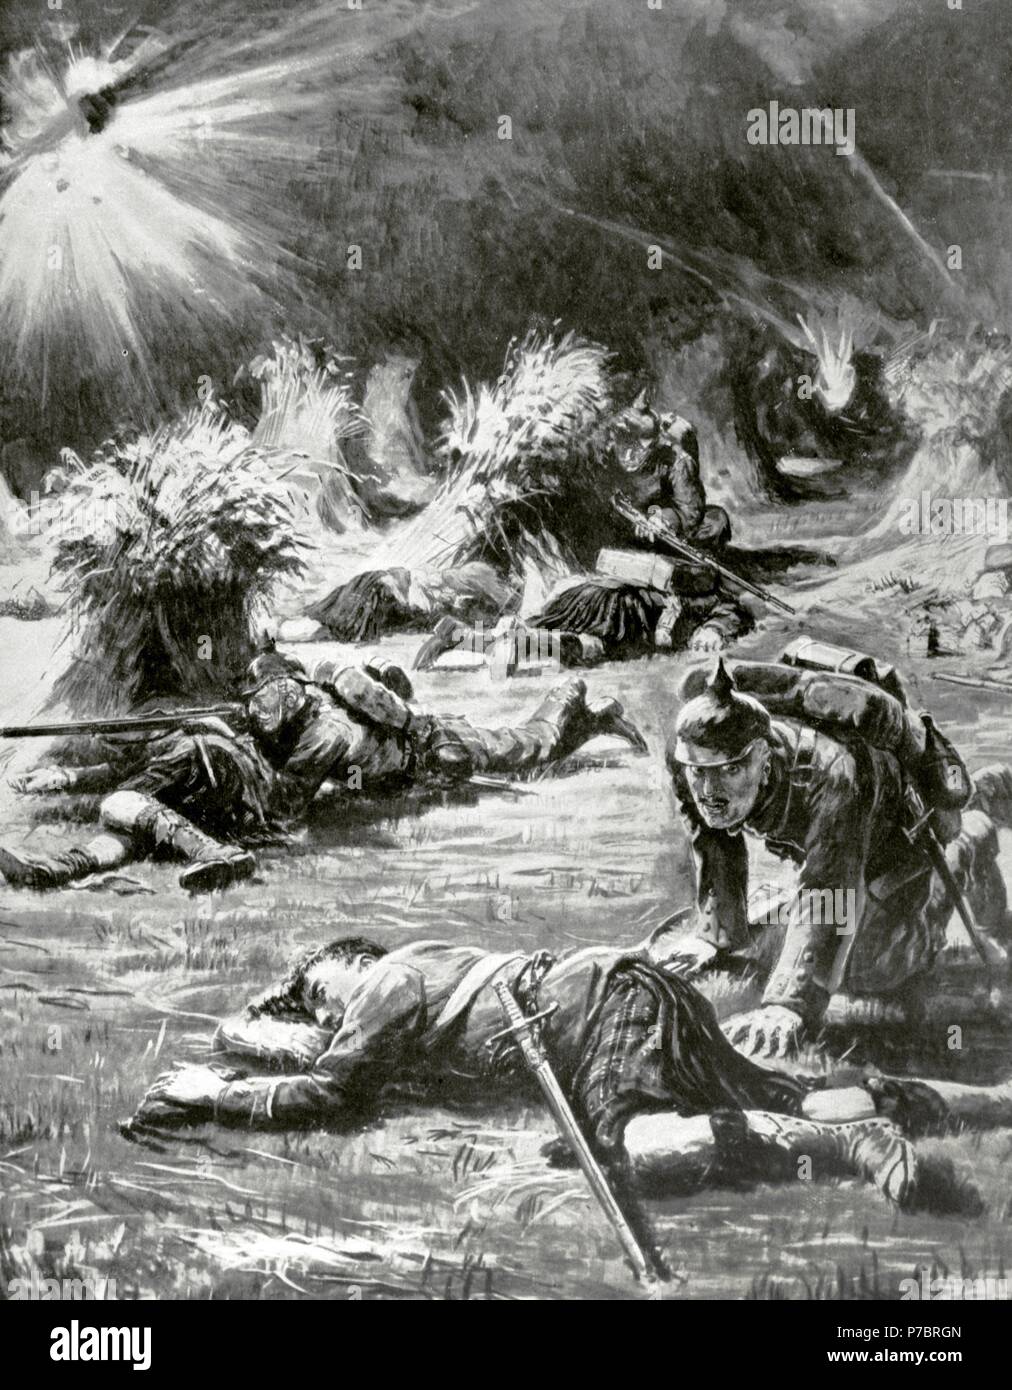 World War I (1914-1918). Night attack of an English position near Aisne, France. The Germans used to protect the bodies of the dead Highlanders. Drawing by Philip Dadd (1880-1916). The Sphere, London, 20th century. Stock Photo